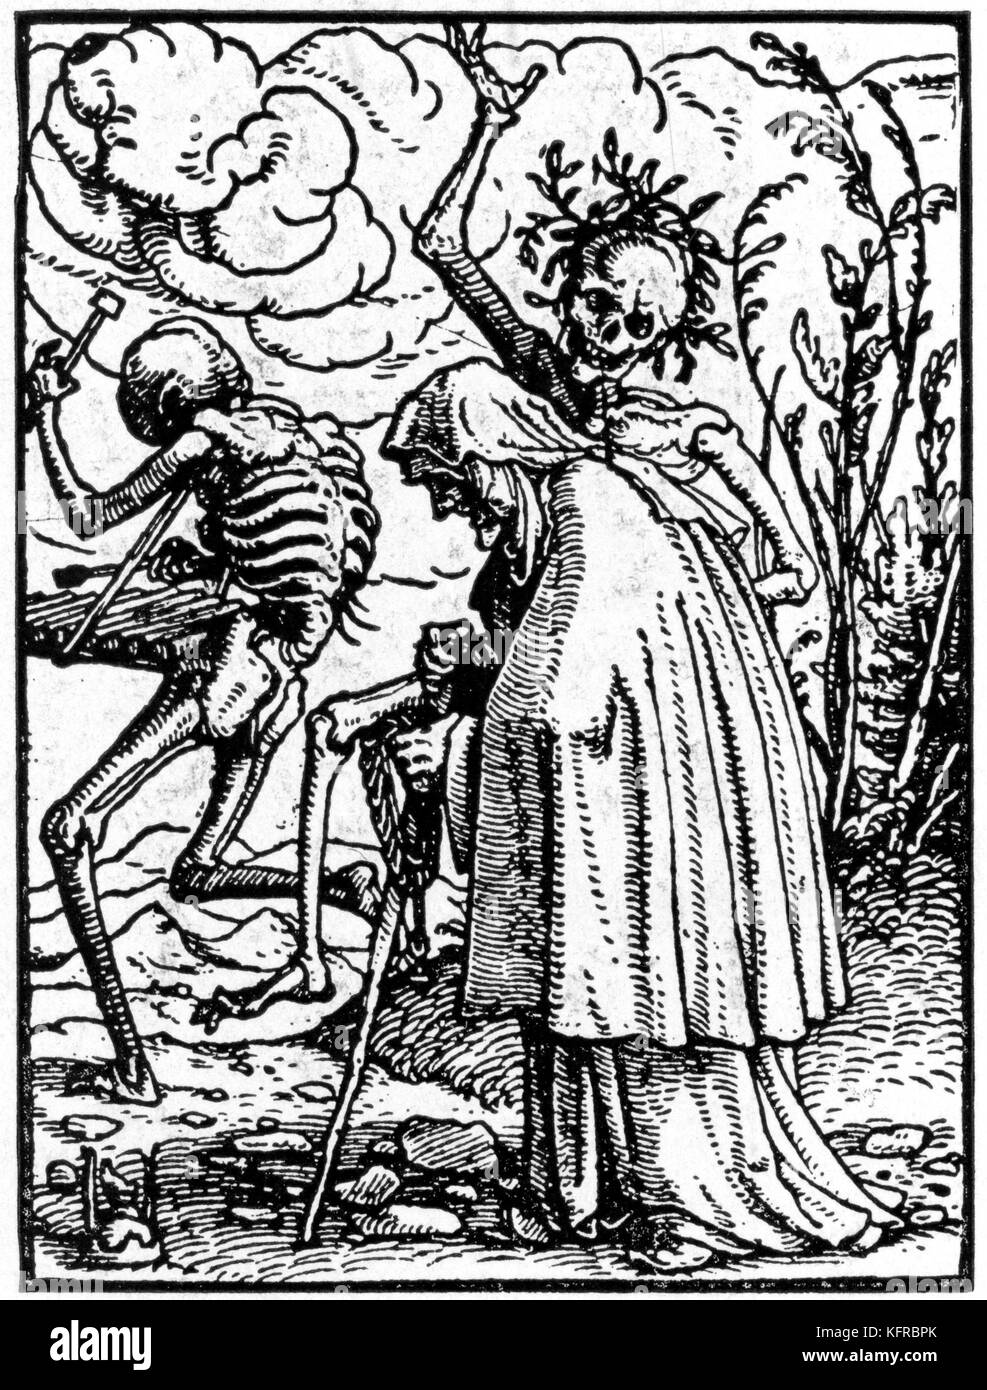 Woodcut from the Dance of Death by Hans Holbein the Younger entitled 'Old Woman' (c. 1525). Death with the Holz- or Stroh-fiedel (xylophone), the so-called 'wooden laughter'. Stock Photo